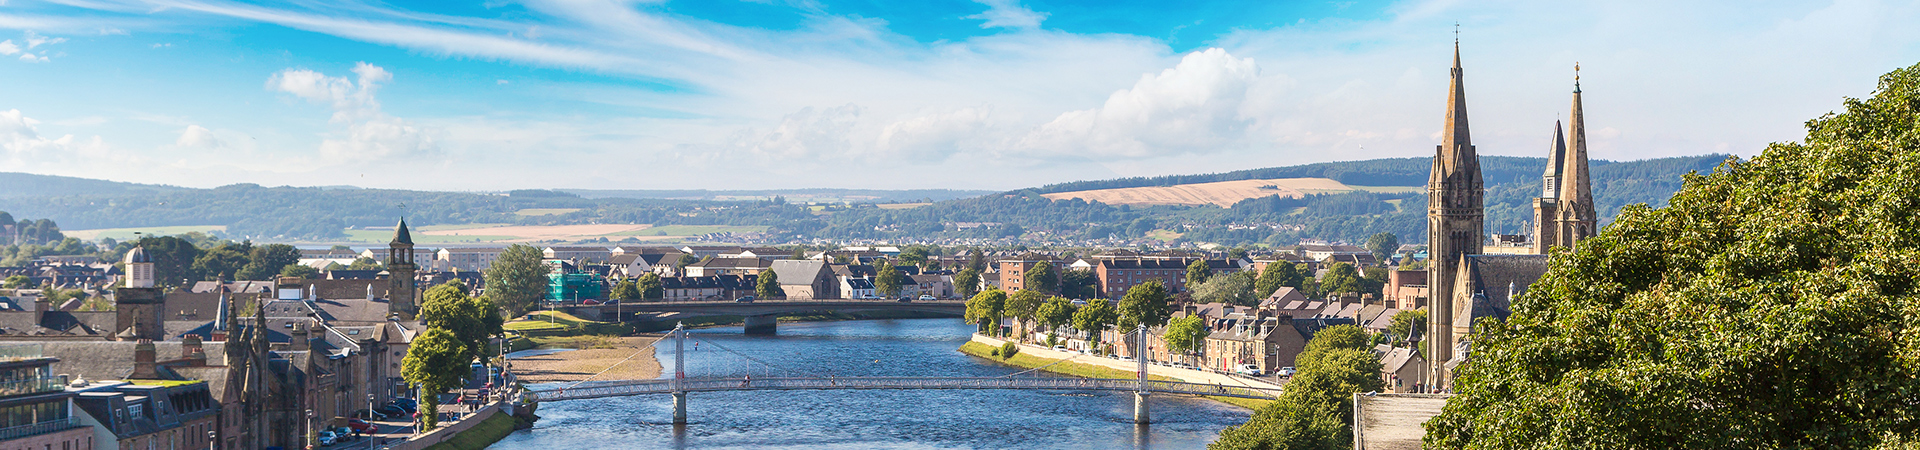 Self-catering holiday in Inverness